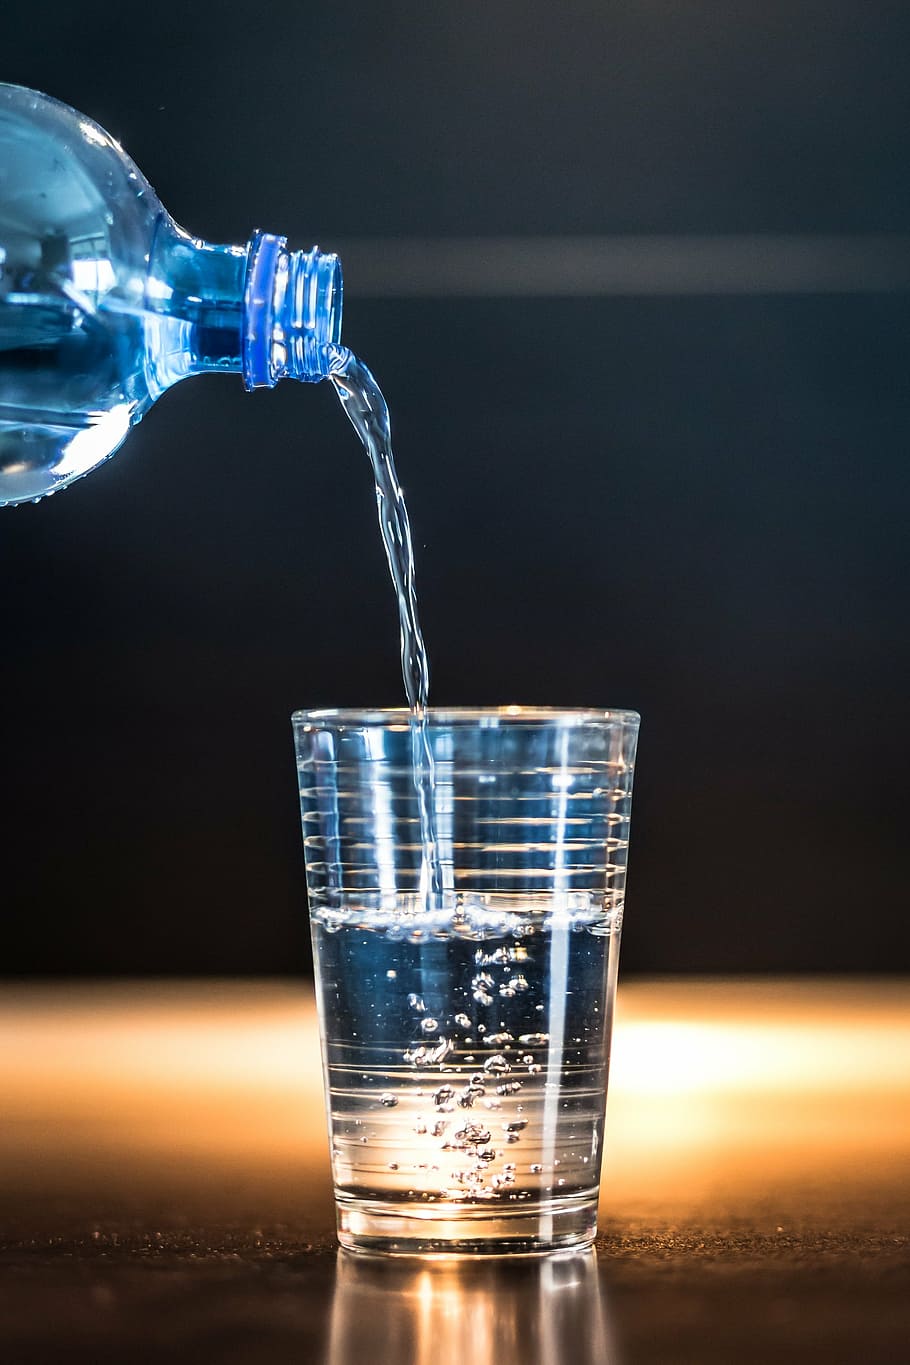 time lapse photo, water, bottle, clear, drinking glass, desire, mineral water, bottle of water, liquid, blue